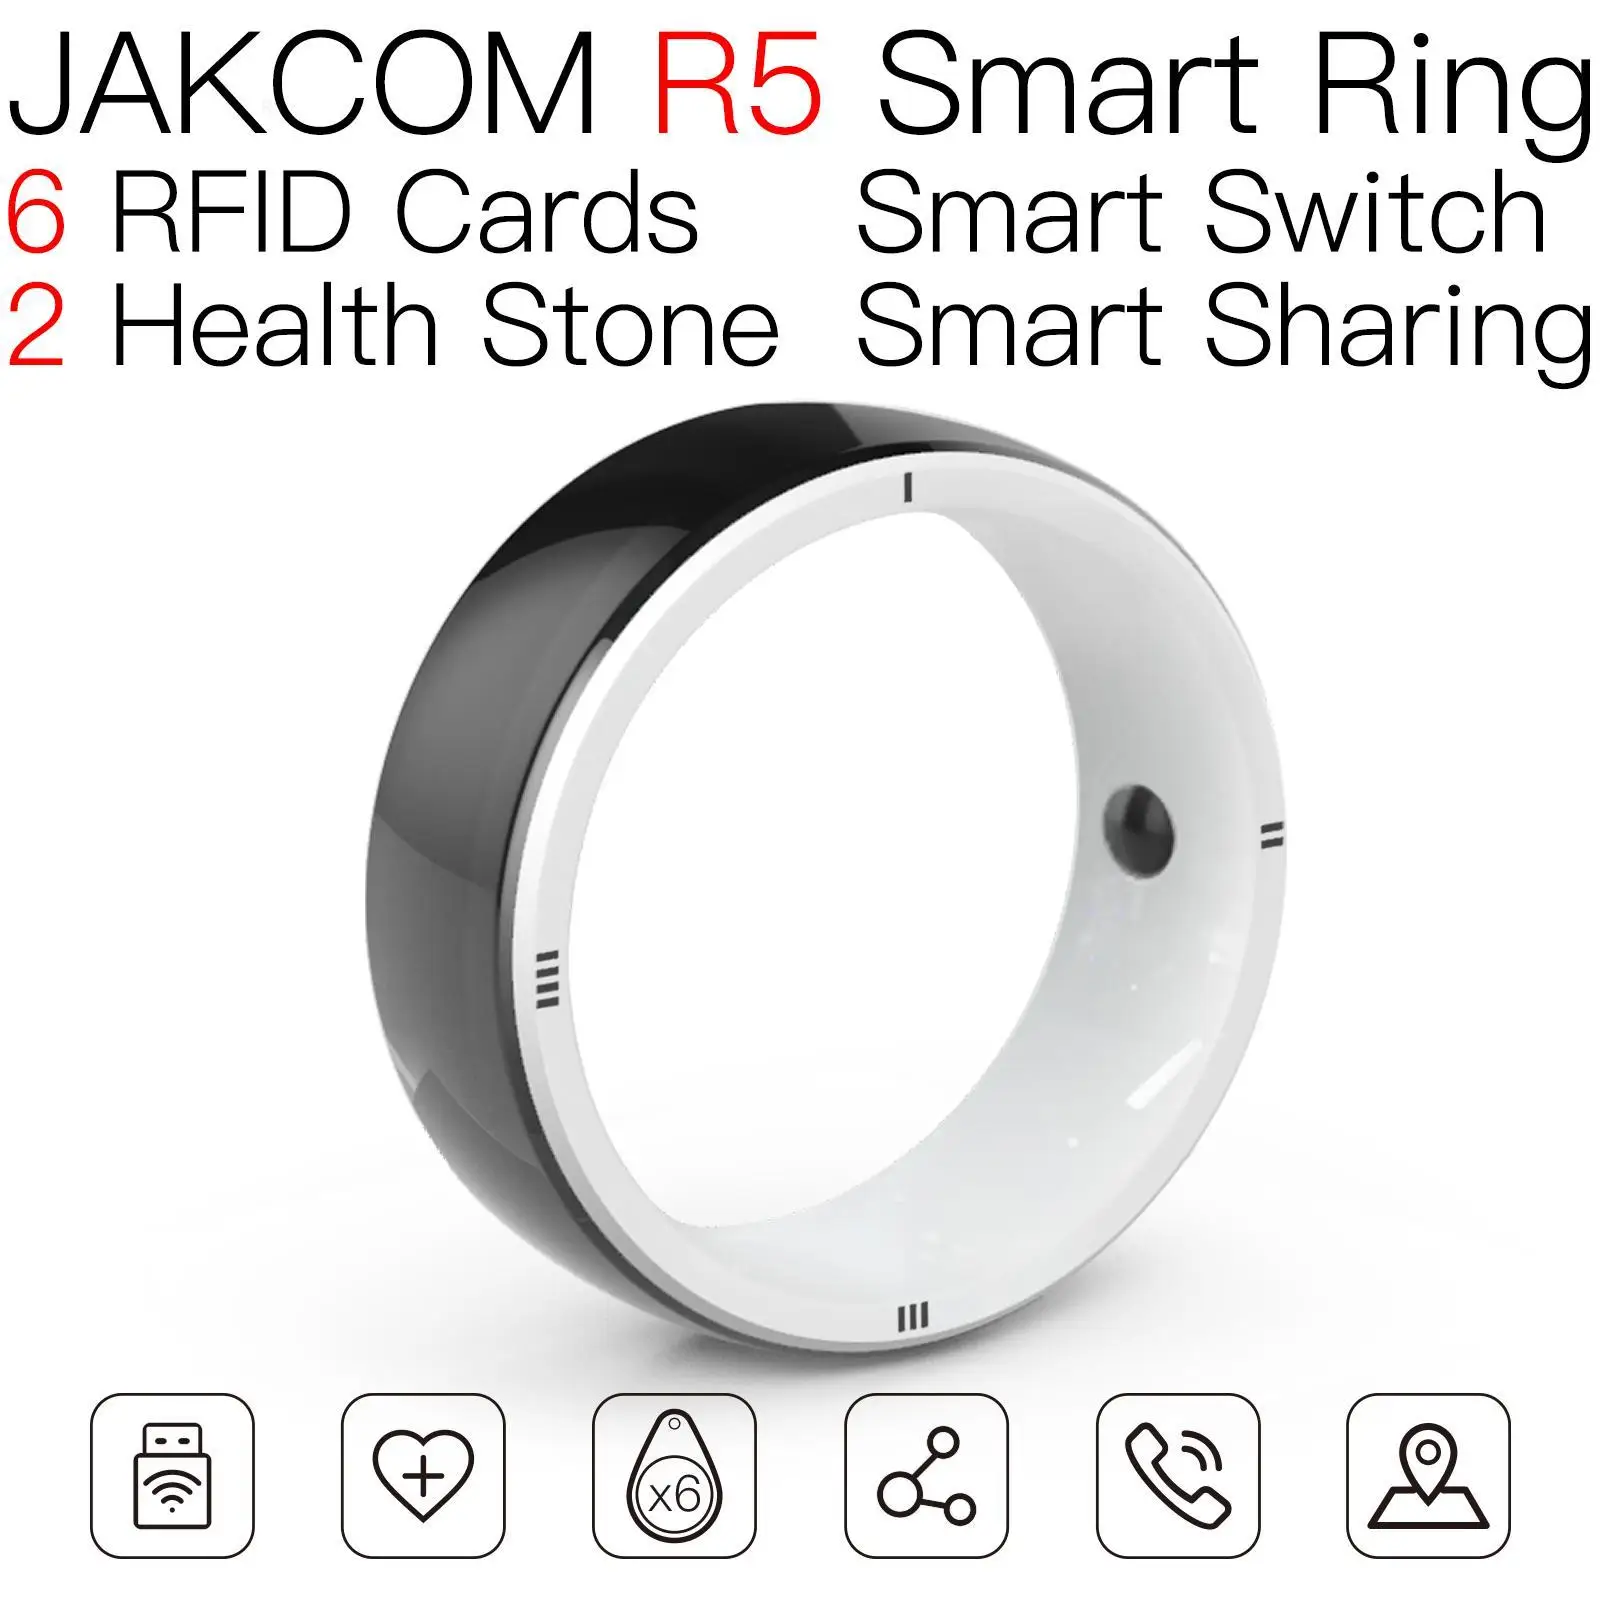 

JAKCOM R5 Smart Ring Match to dual frequency hf uhf nfc classic 1k s50 and h3 smart card for payment vehicle rfid tag chip 125